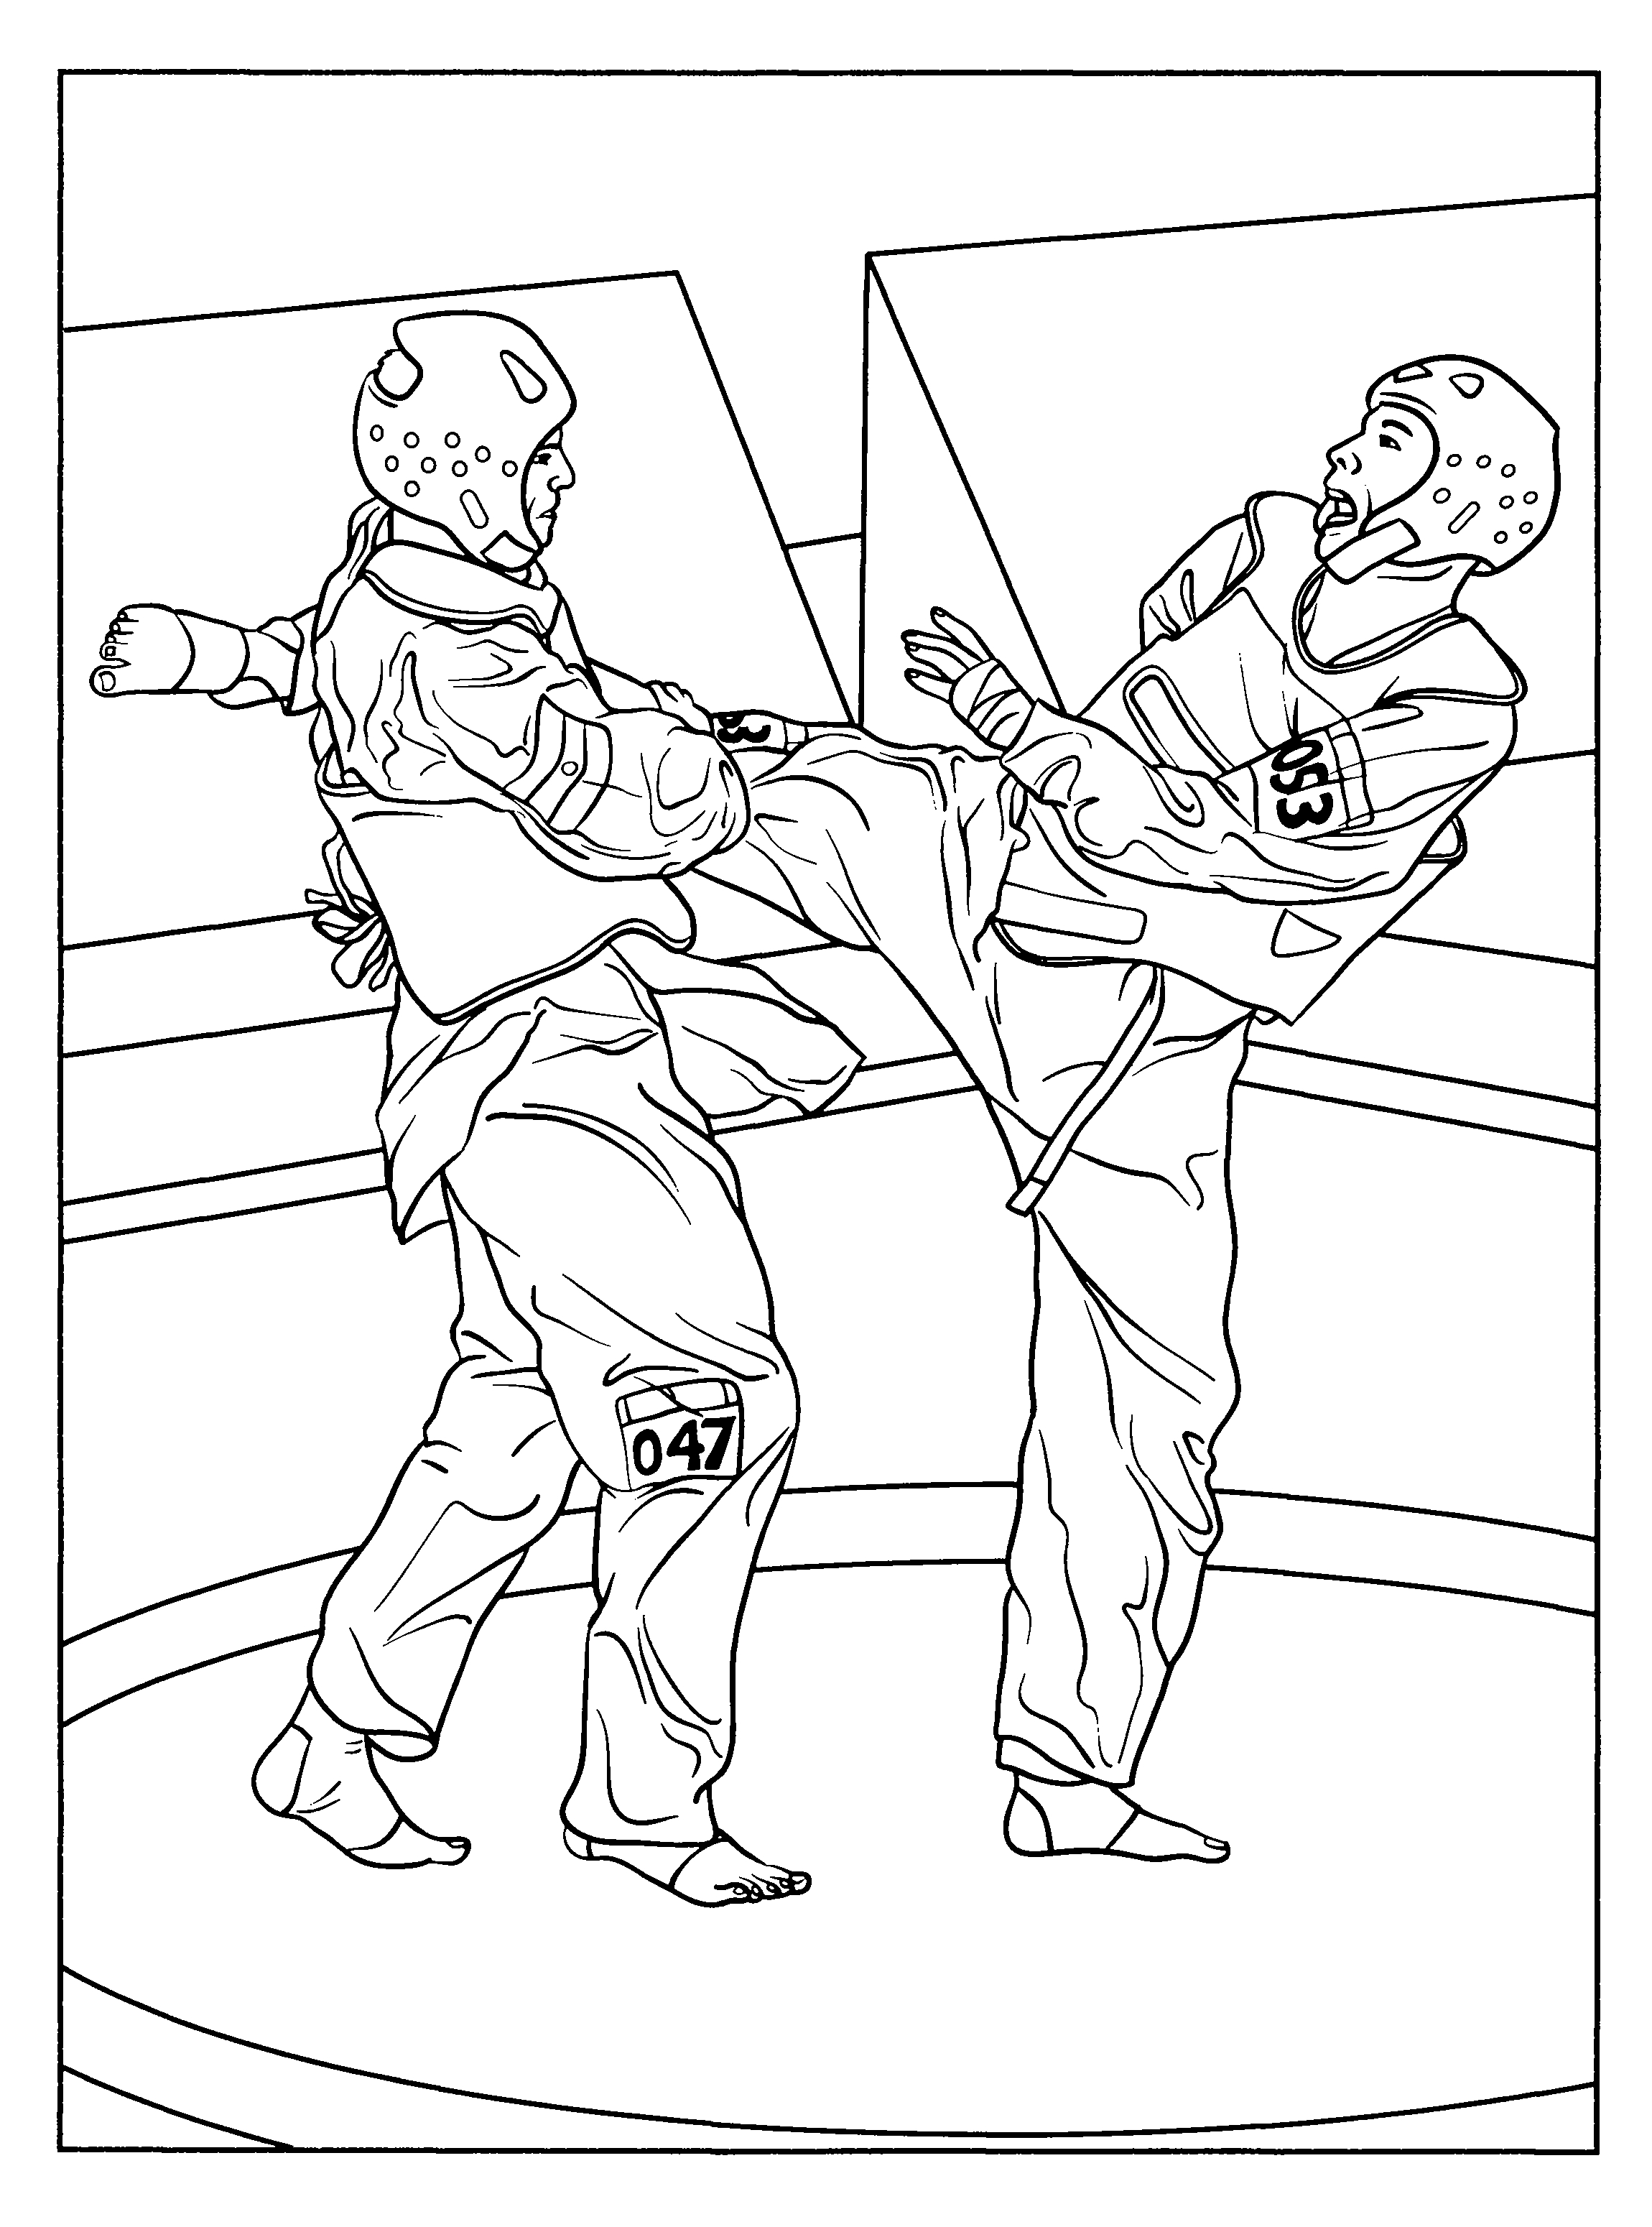 Karate Coloring Pages For Kids | Coloring Pages | Pinterest | Karate - Free Printable Karate Coloring Pages